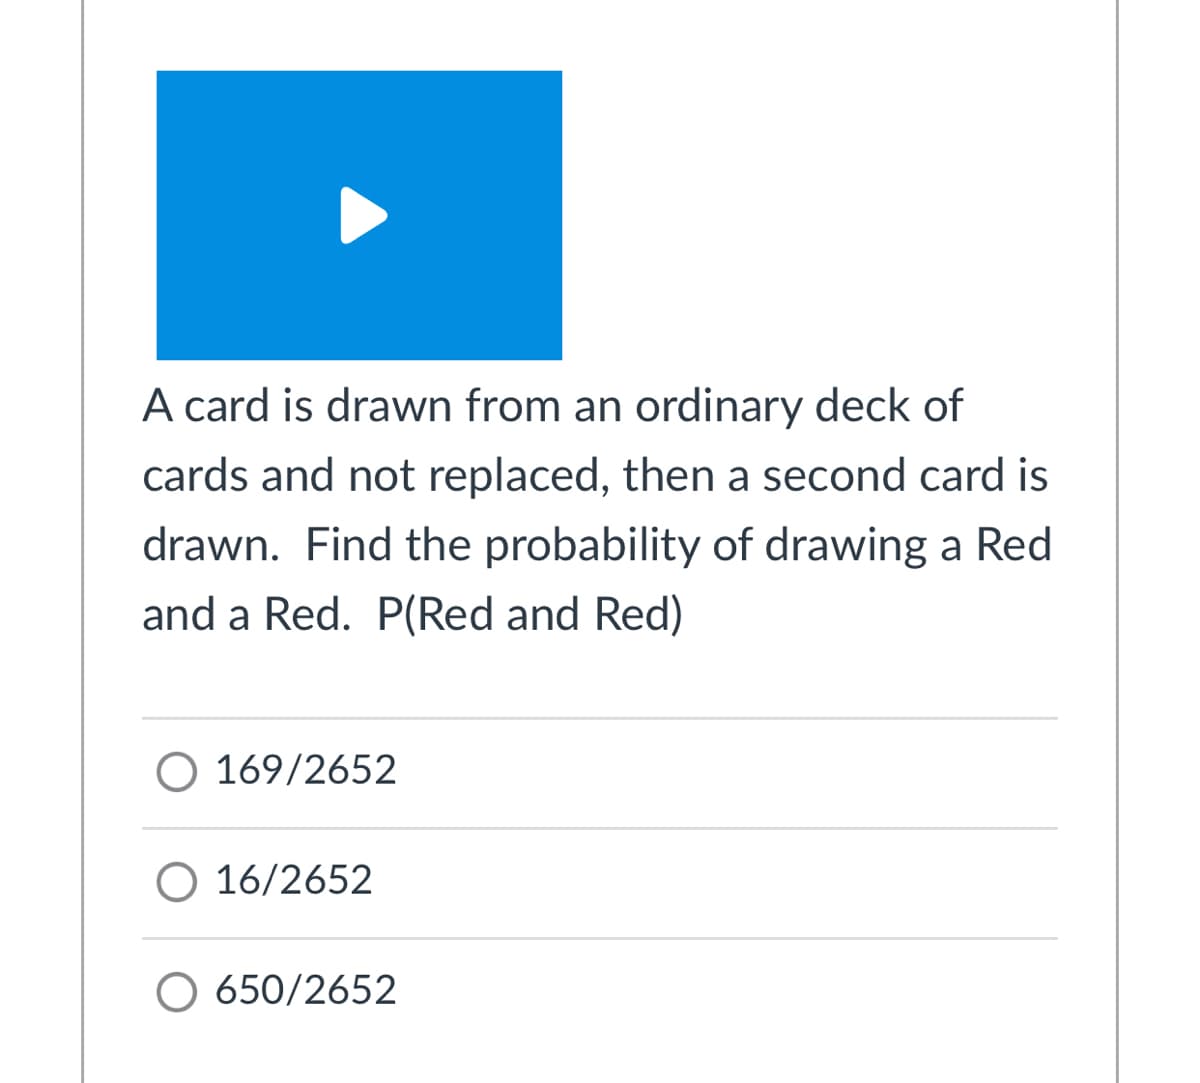 A card is drawn from an ordinary deck of
cards and not replaced, then a second card is
drawn. Find the probability of drawing a Red
and a Red. P(Red and Red)
O 169/2652
O 16/2652
O 650/2652
